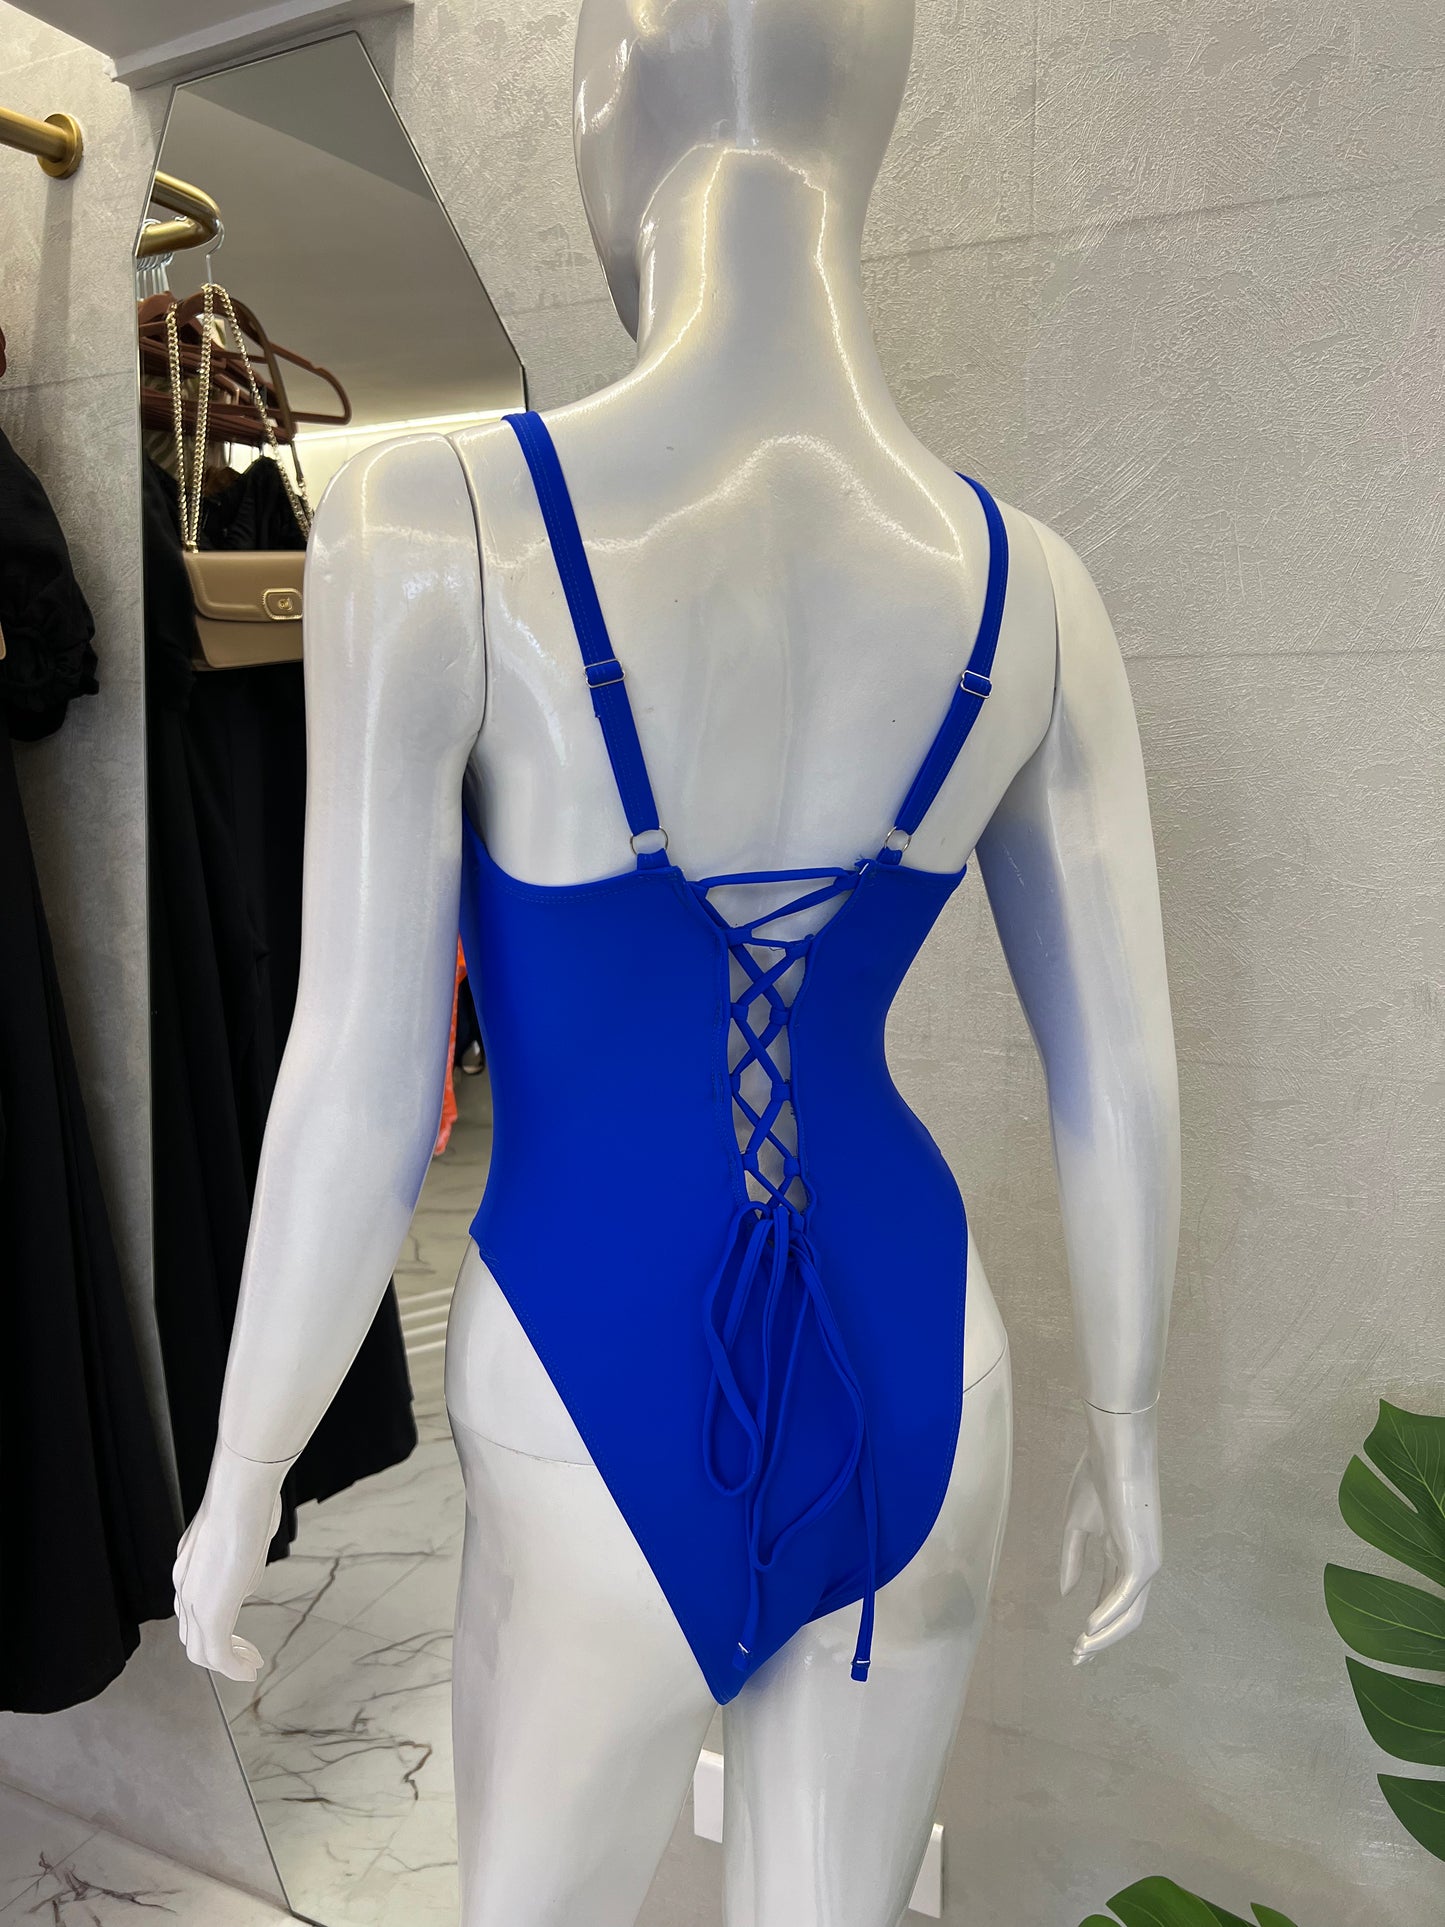 PADDED HIGH CUT SWIMSUIT